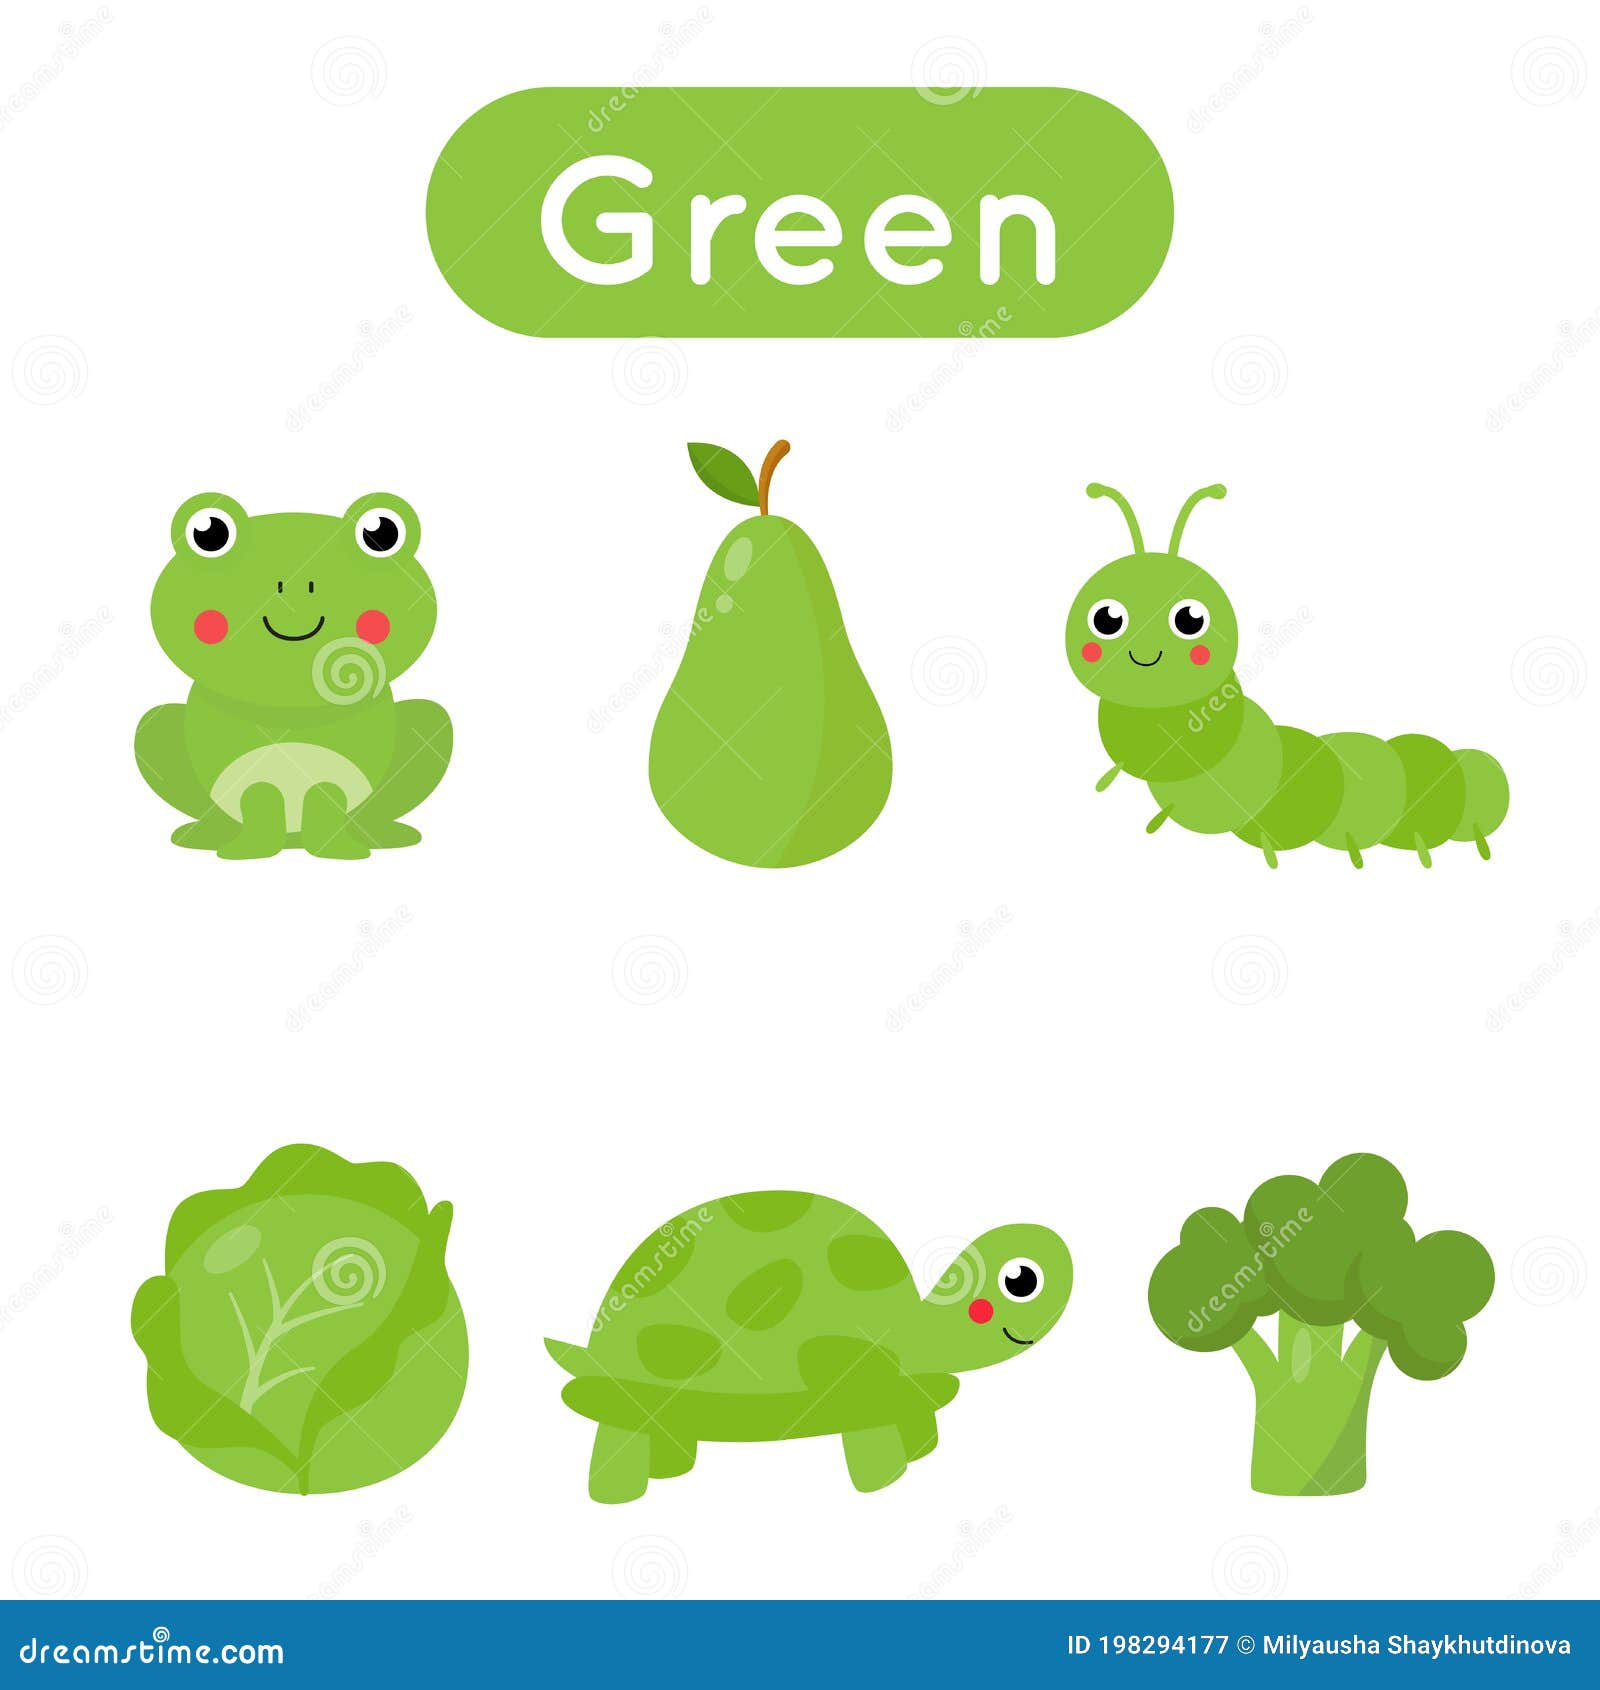 Flash Cards with Objects in Green Color. Educational Printable Worksheet.  Stock Vector - Illustration of collection, caterpillar: 198294177